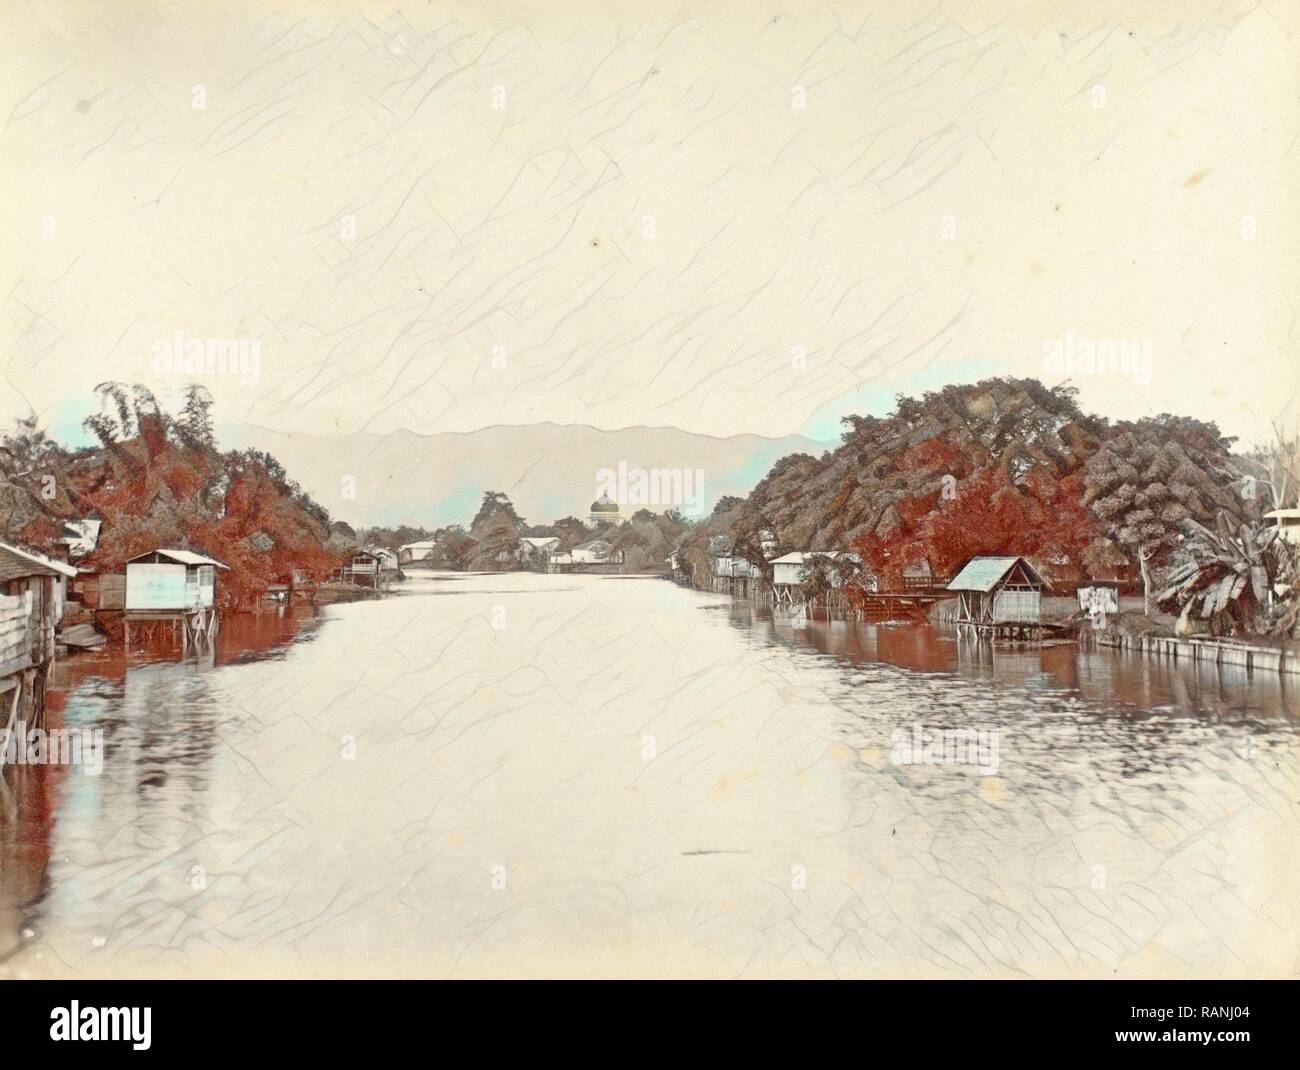 River with stilt houses in the Dutch East Indies, Anonymous, c. 1895 - c. 1905. Reimagined by Gibon. Classic art with reimagined Stock Photo